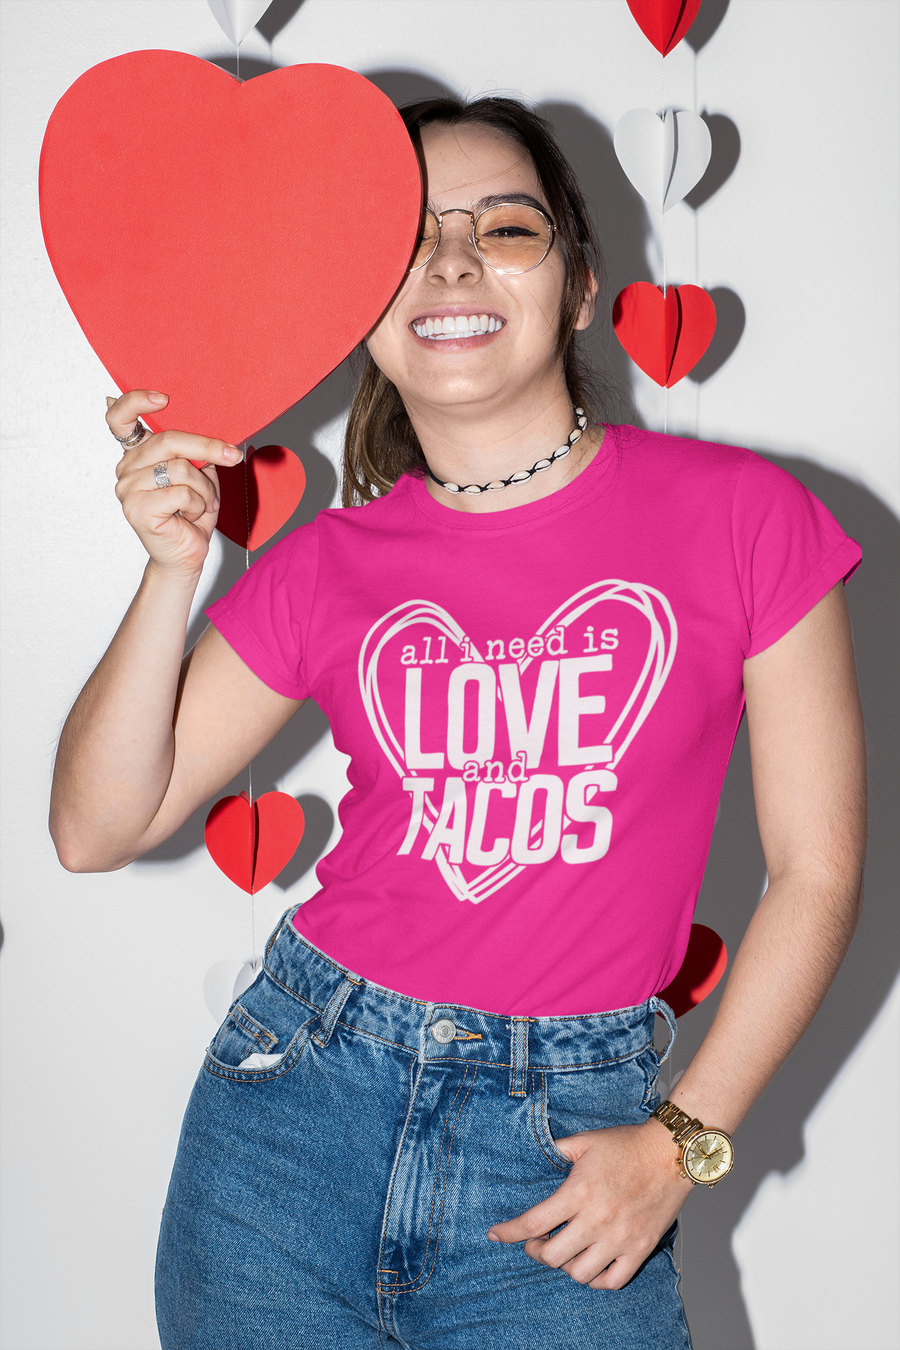 All You Need is Love and Tacos Tee